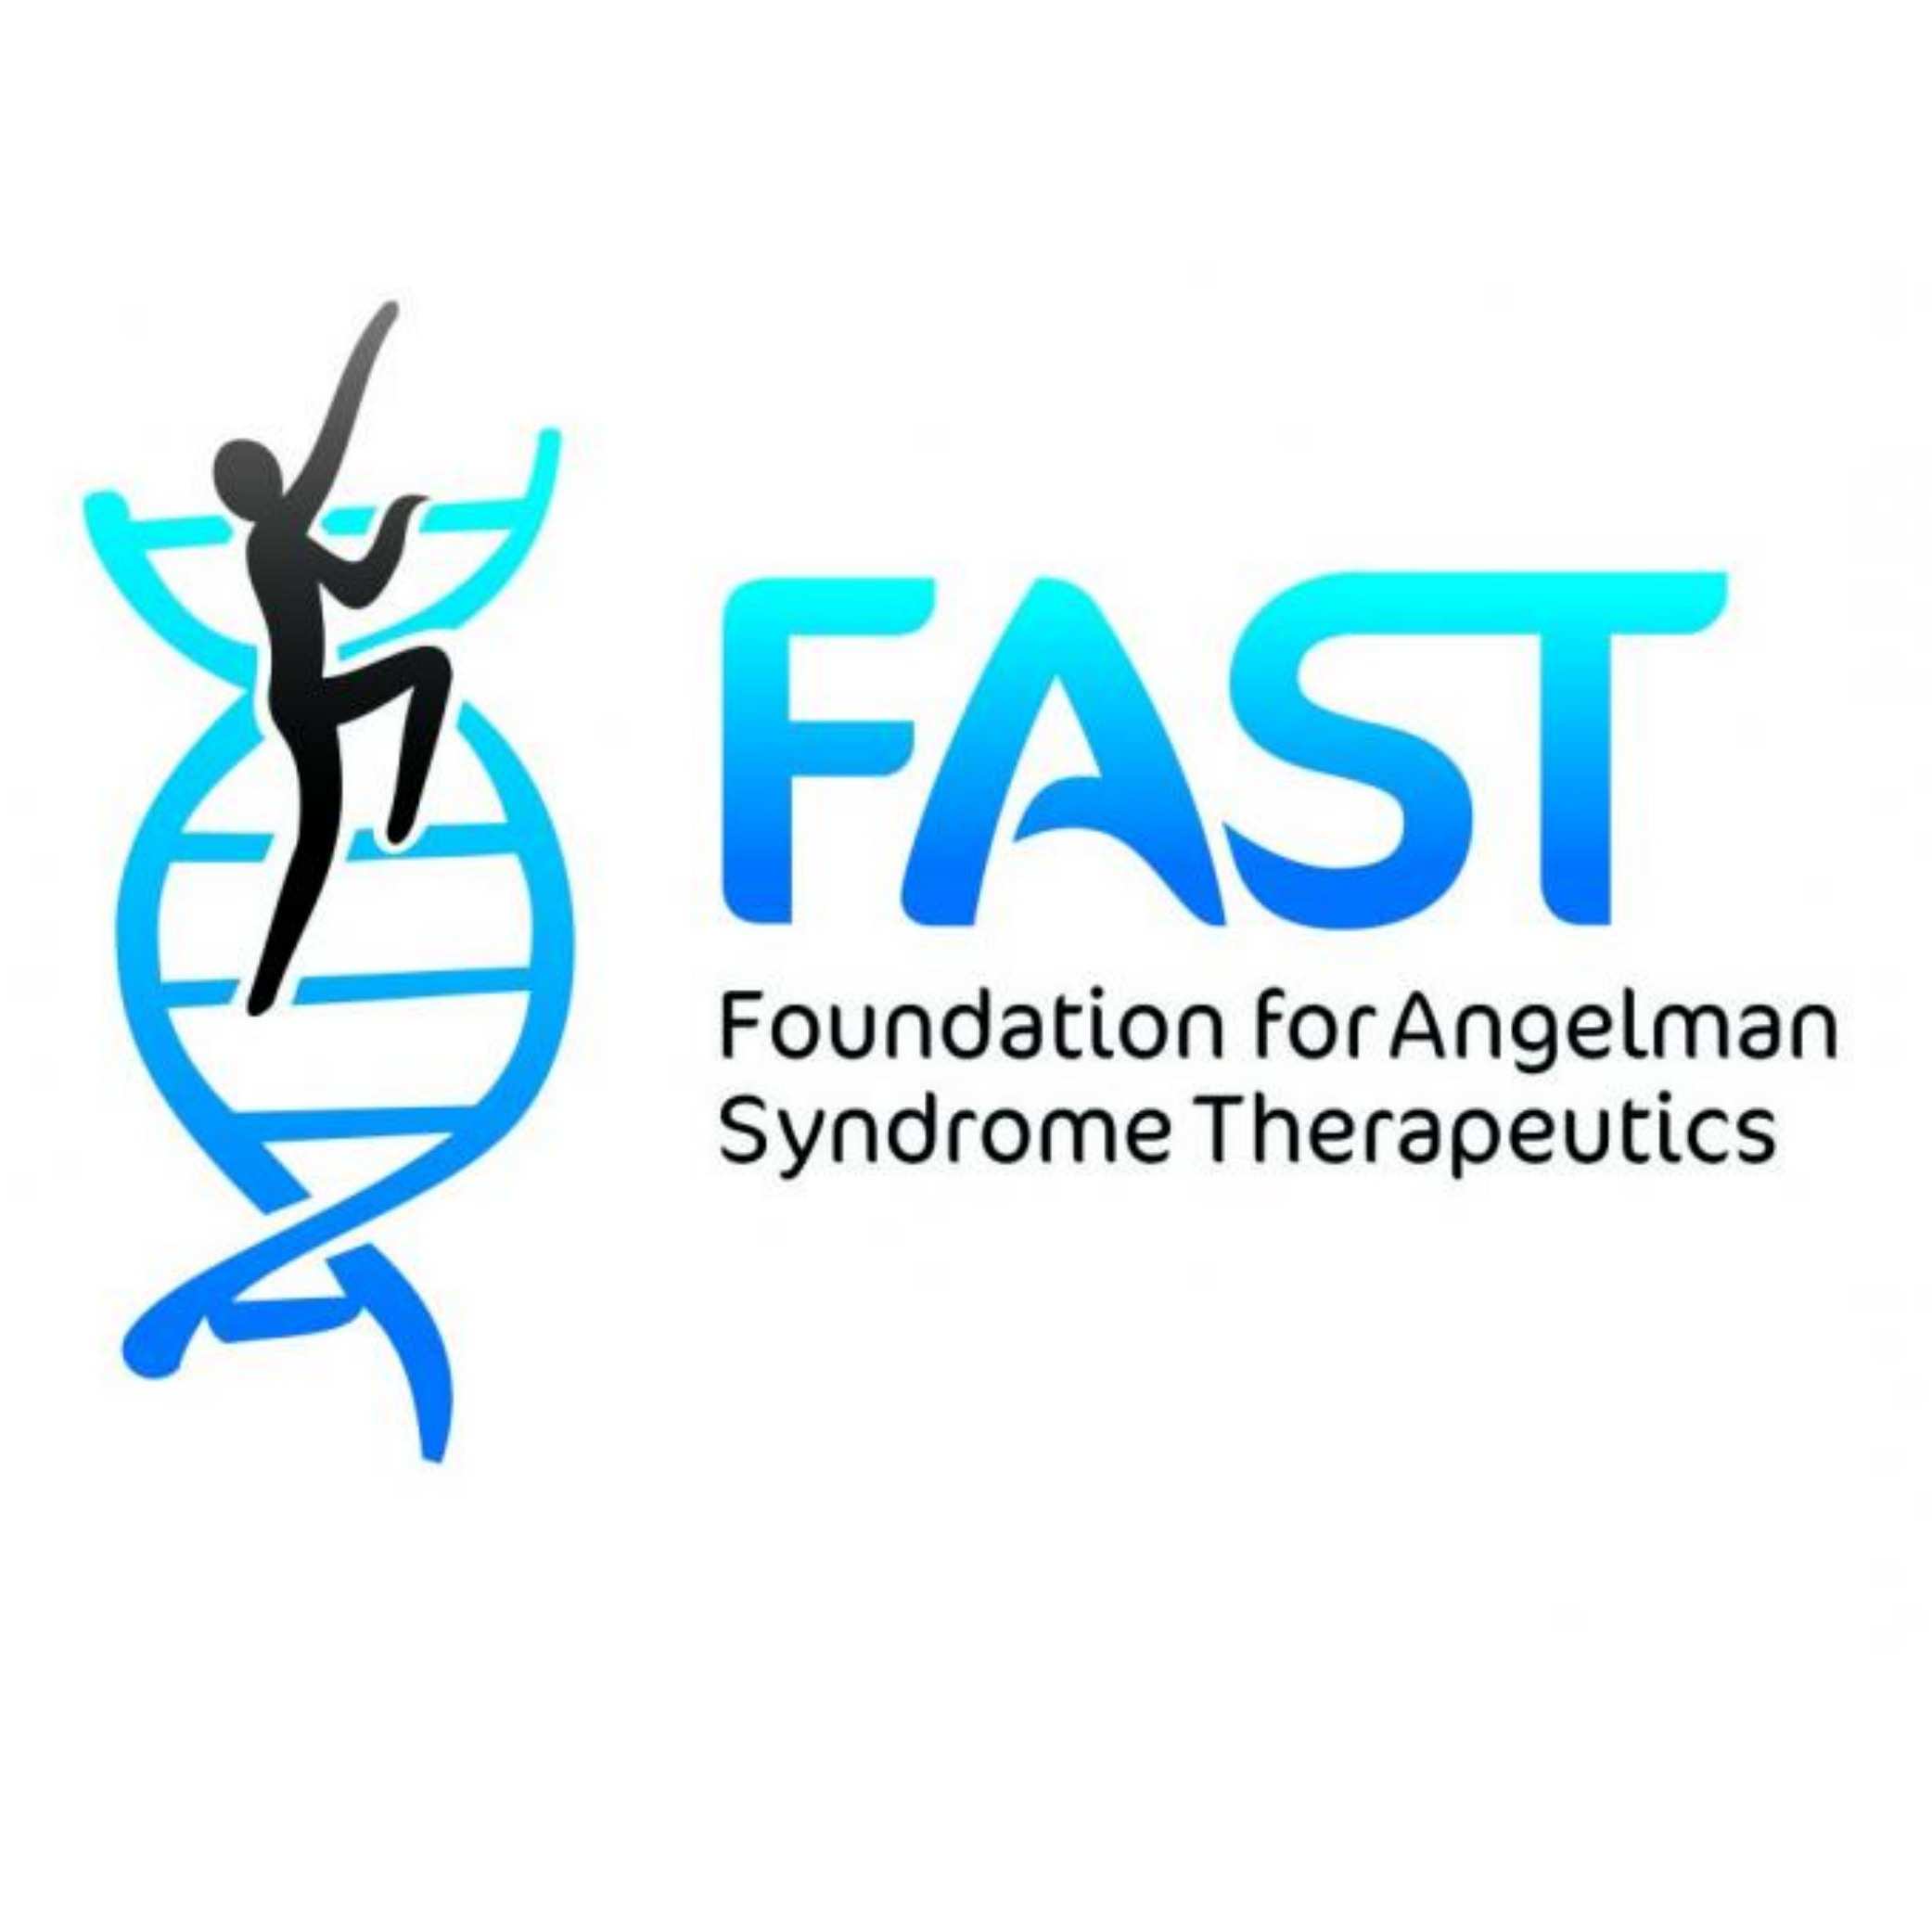 Taking Aim at Treatment Options for Children with Angelman Syndrome